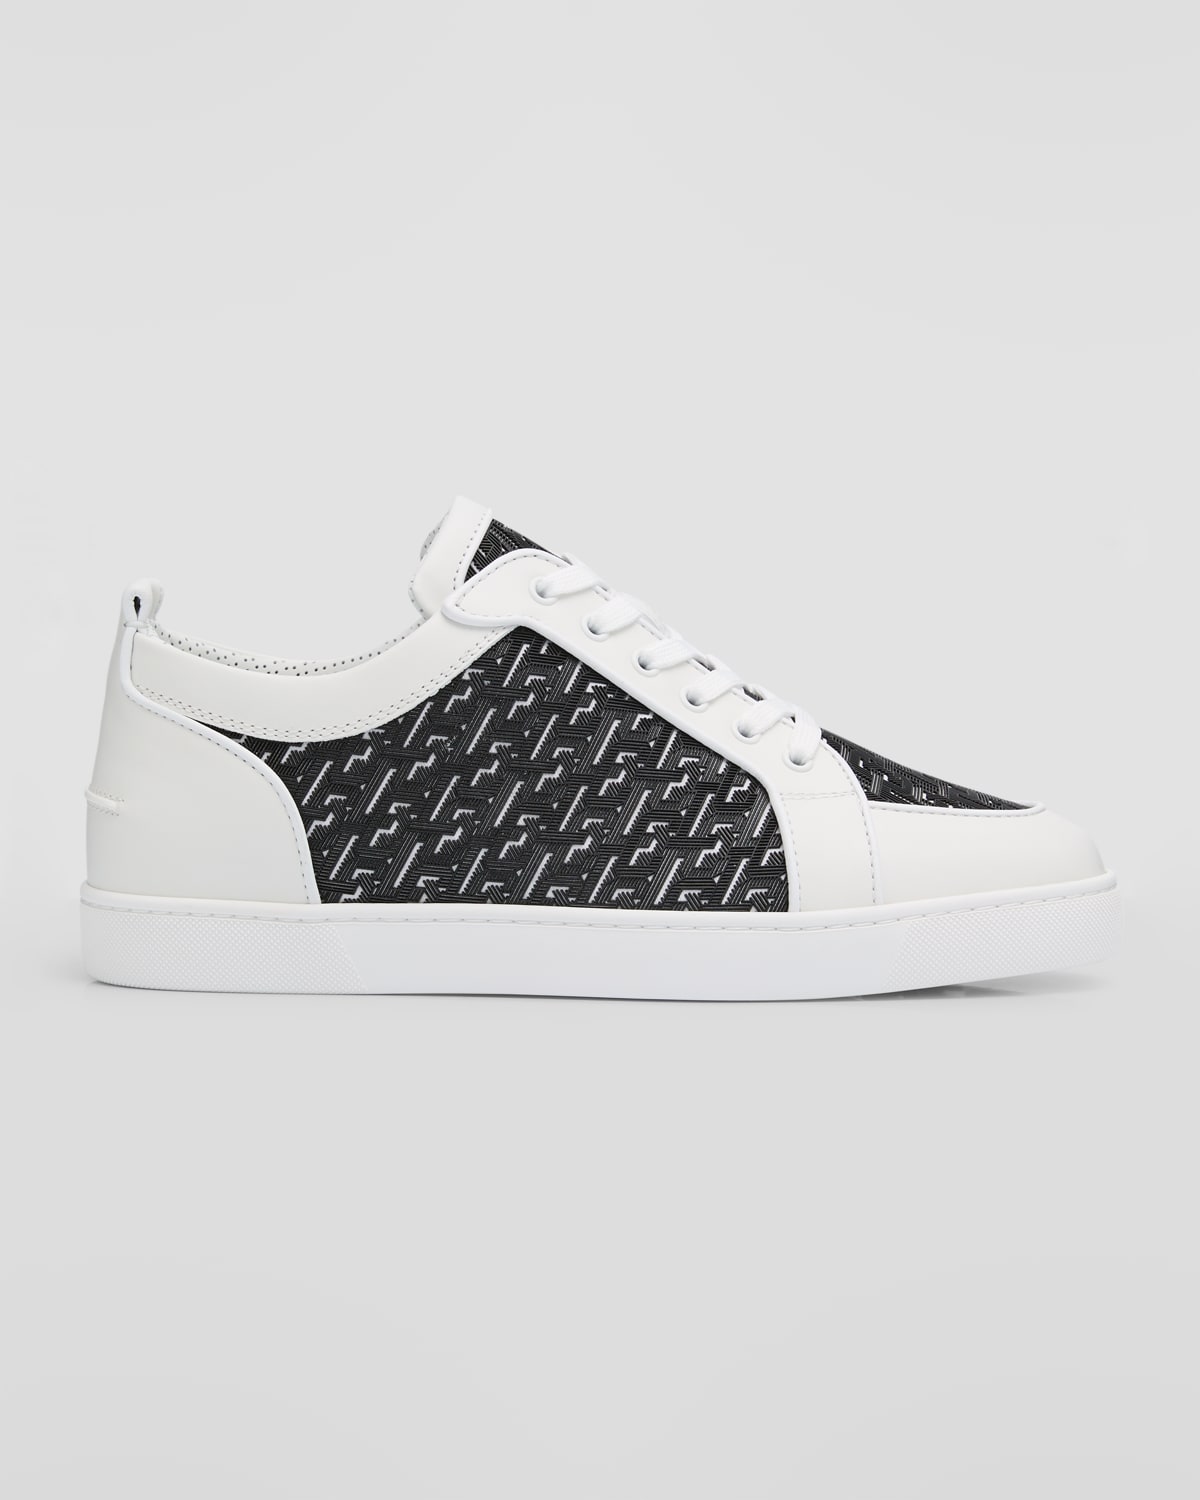 CHRISTIAN LOUBOUTIN MEN'S RANTULOW TECHNO CL LEATHER LOW-TOP SNEAKERS